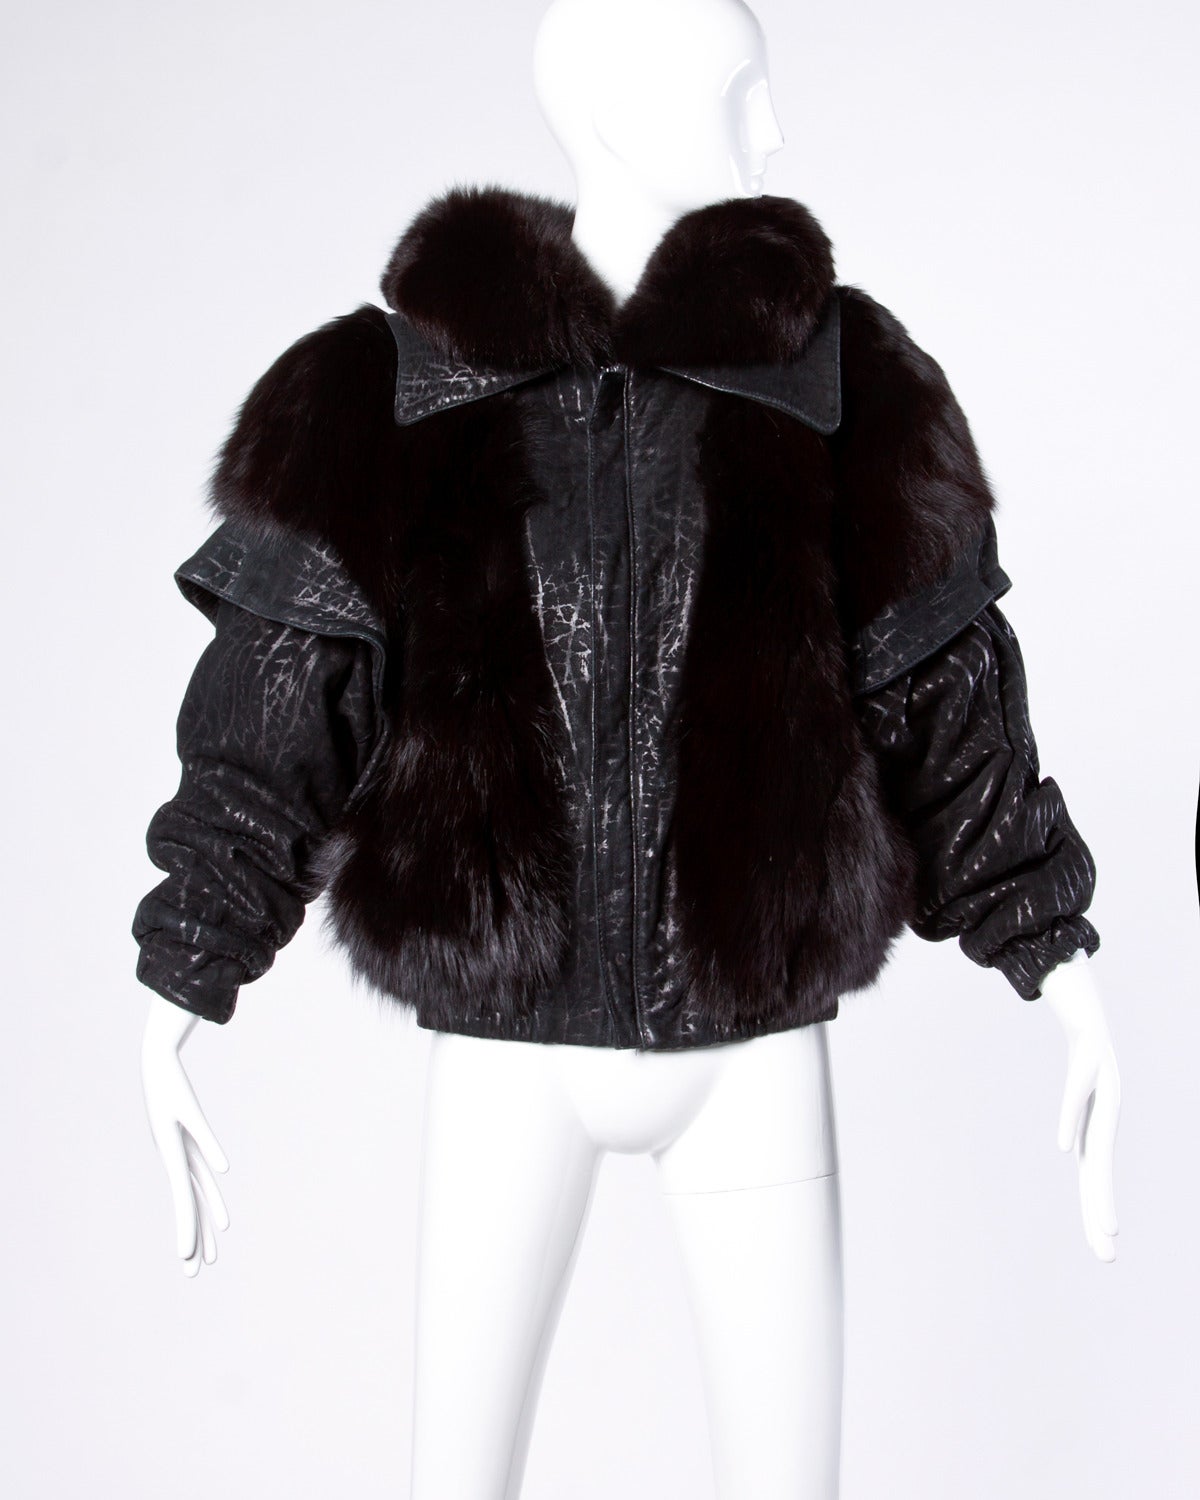 Avant garde black fox fur and textured leather jacket. High quality glossy fox fur is in excellent condition. Oversized bomber-style fit.

Details:

Fully Lined
Side Pockets
Shoulder Pads Sewn Into Lining
Front Zip Closure
Estimated Size: